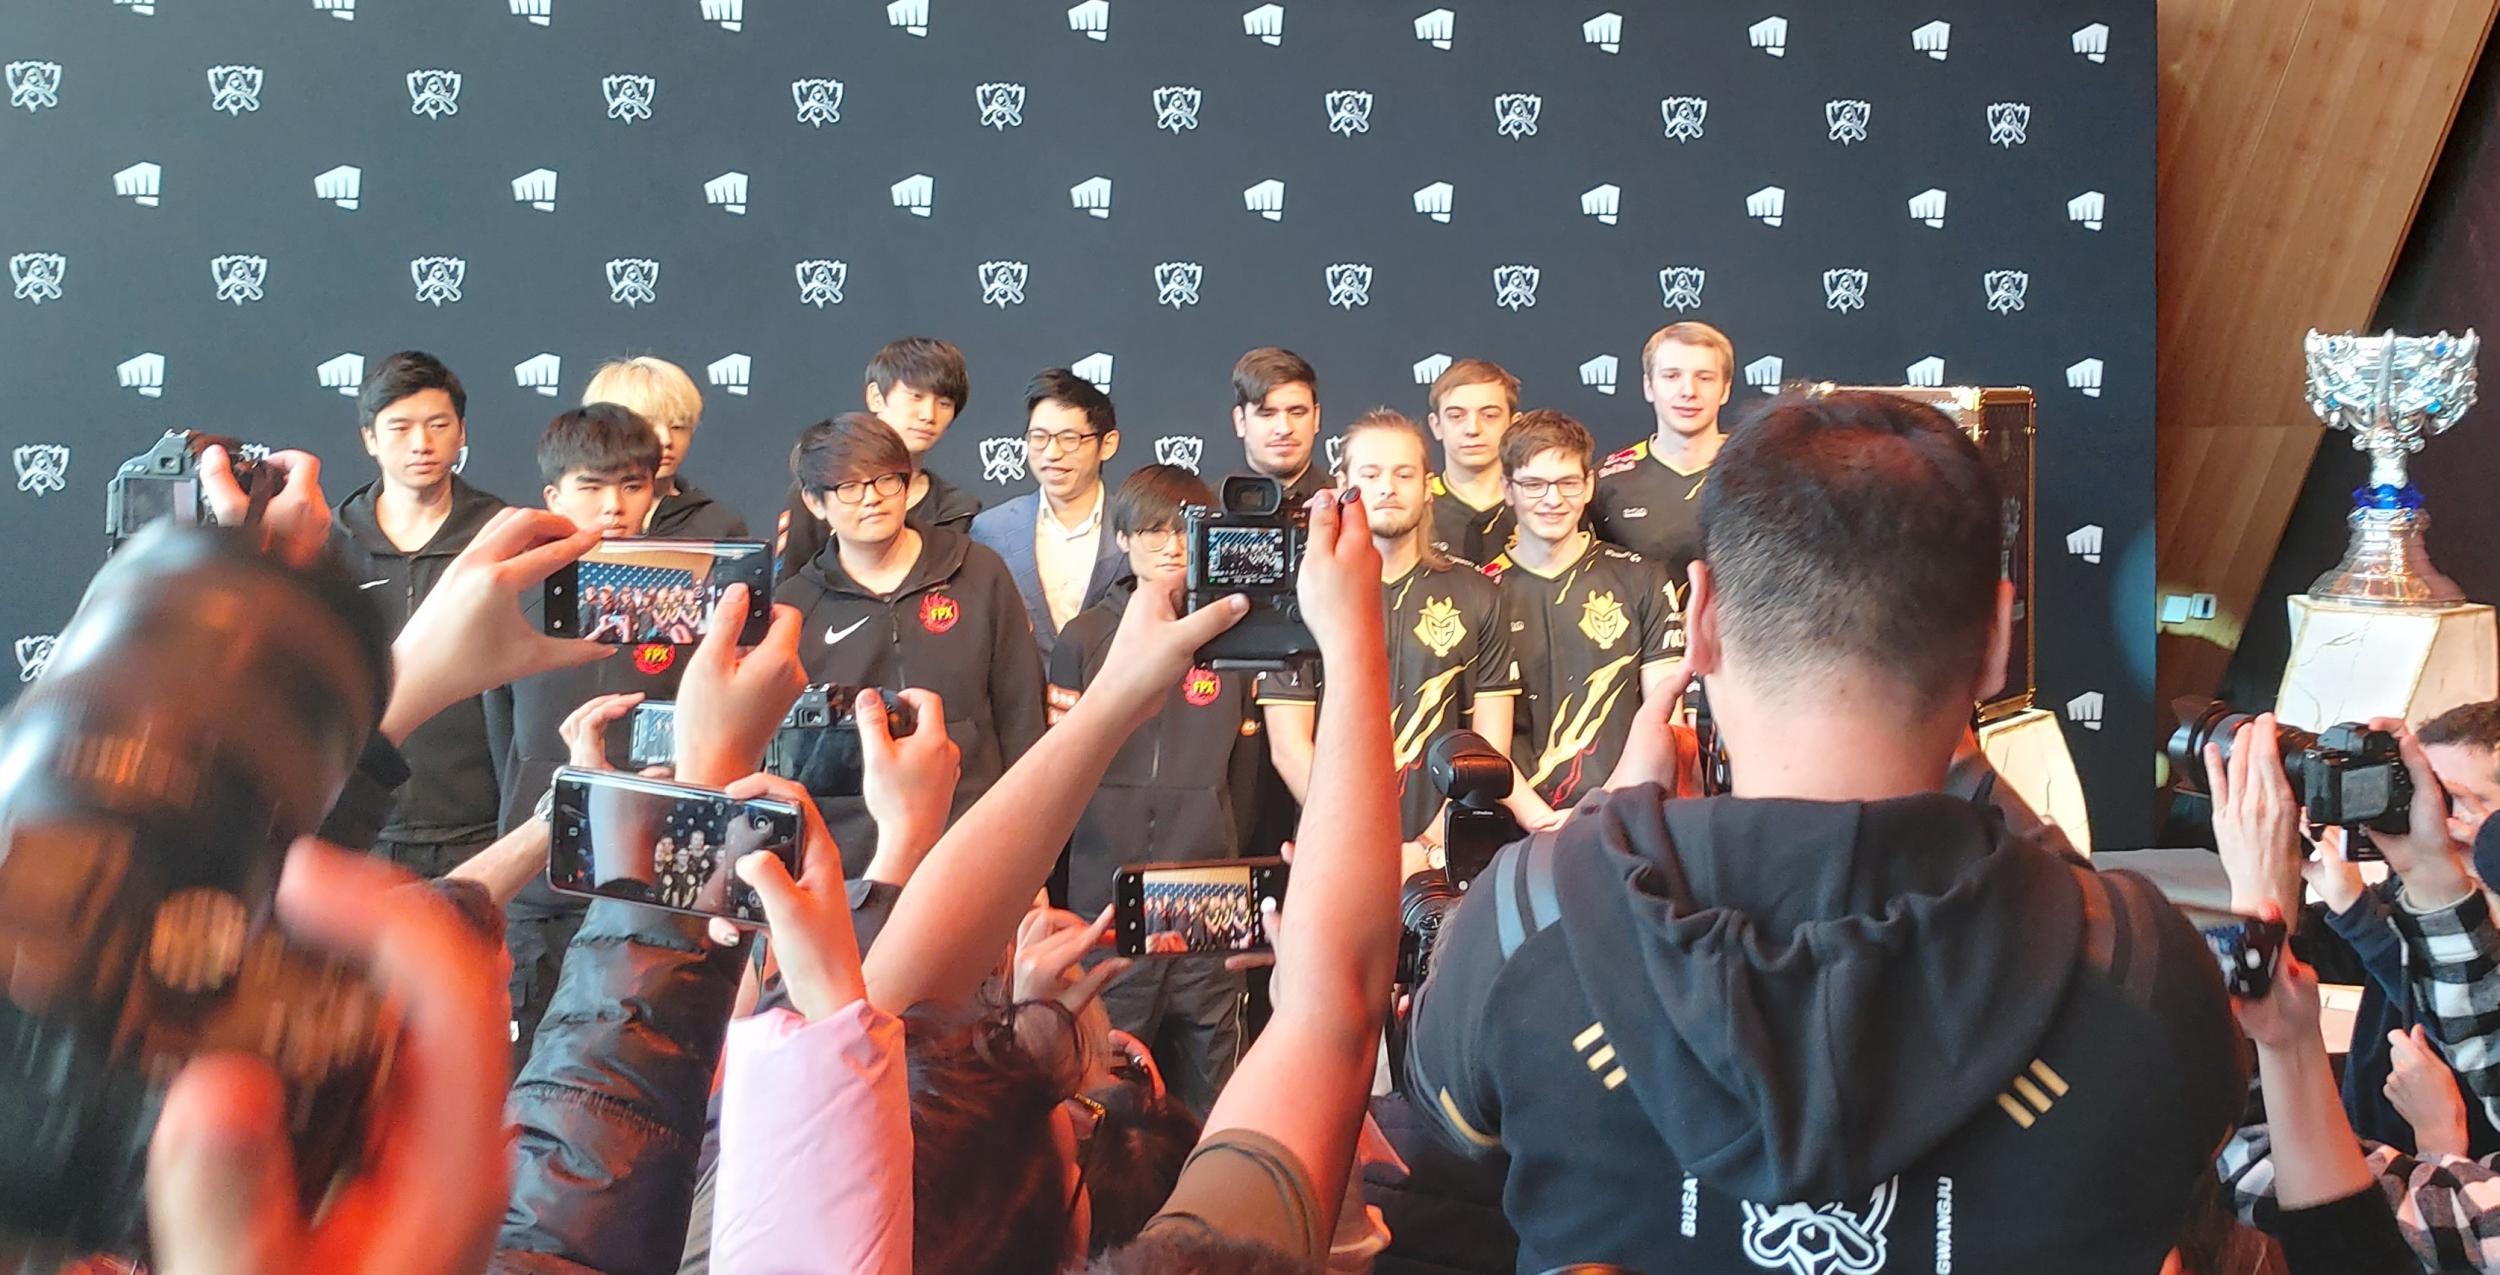 FunPlus Phoenix Win The 'League Of Legends' World Championship In A 3-0  Stomp